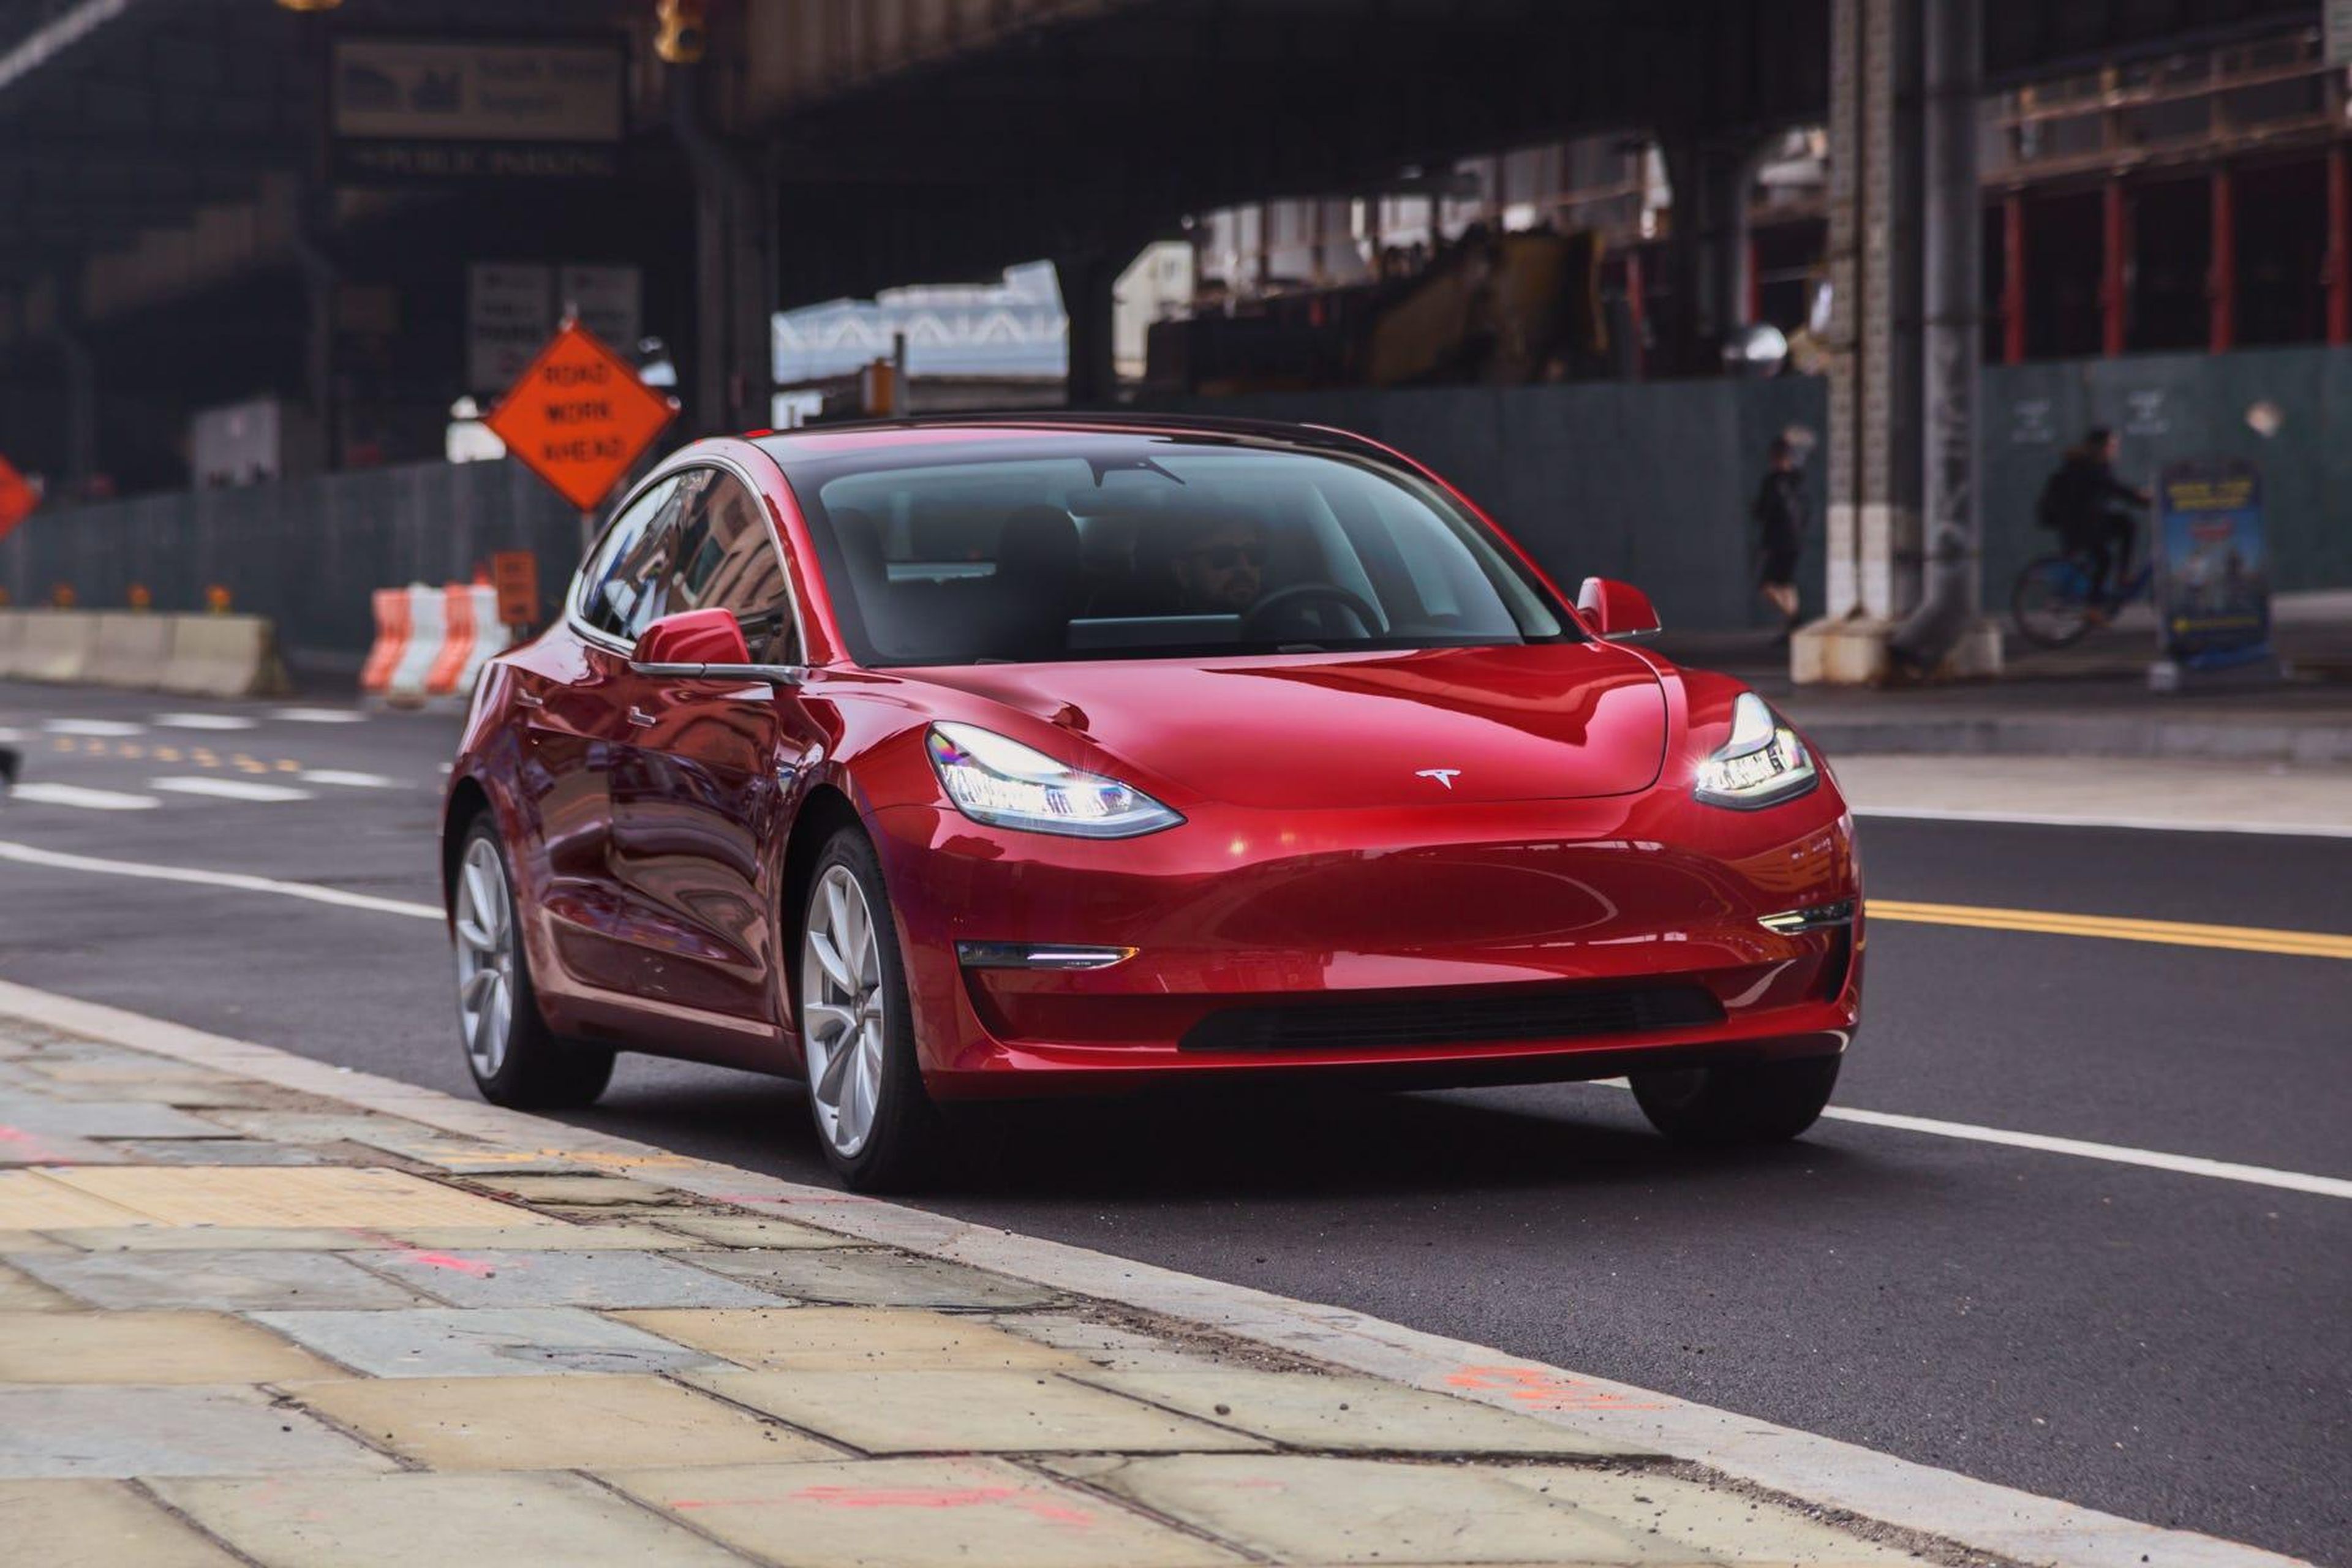 The Model 3 is Tesla's newest vehicle. The compact sedan launched in mid-2017. Initially, only "premium," long-range versions were made, but a pricey Performance trim followed, and most recently a $40,000 base car arrived.